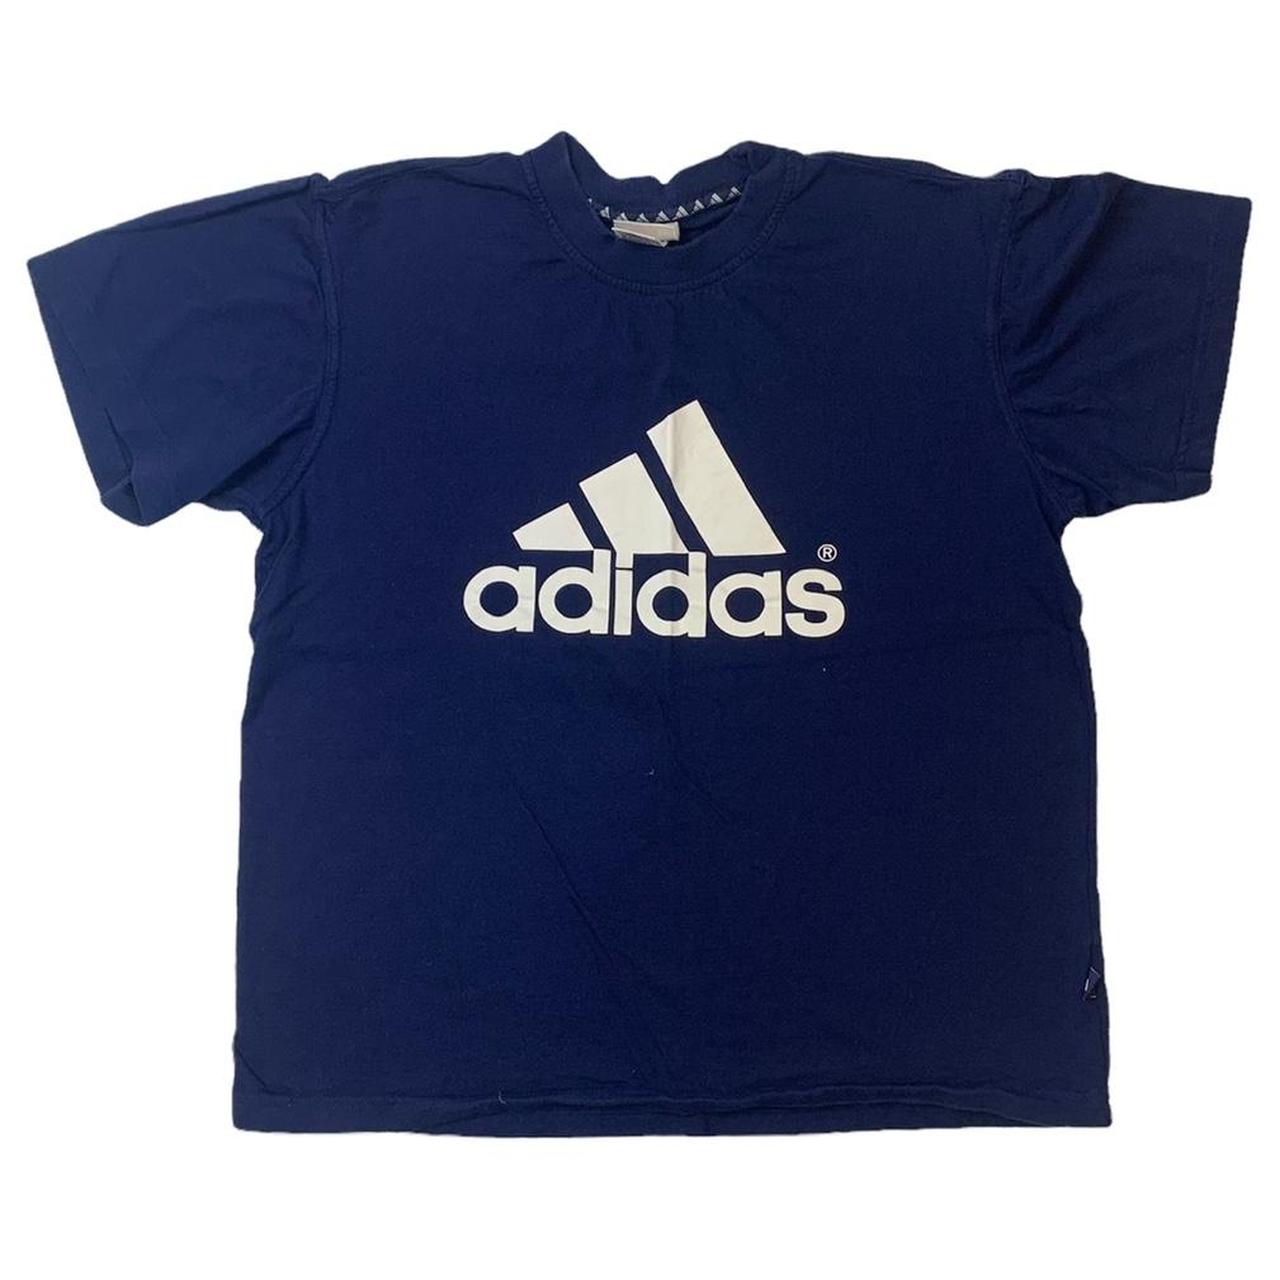 Womens 90’s Adidas T-shirt in navy 📌 Our... - Depop